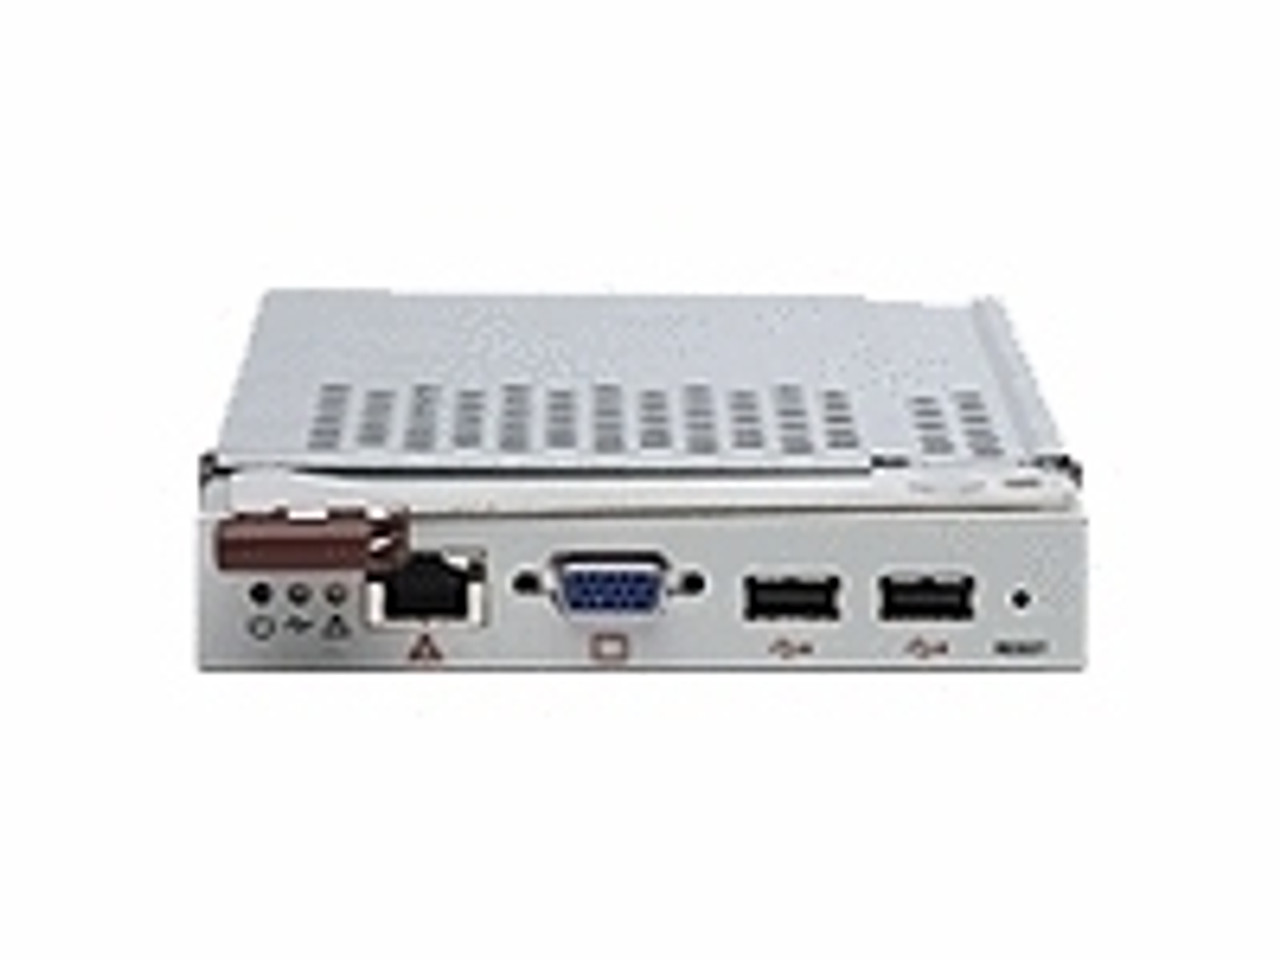 SBM-CMM-001 | Supermicro | Superblade Chassis Management Module network switch component